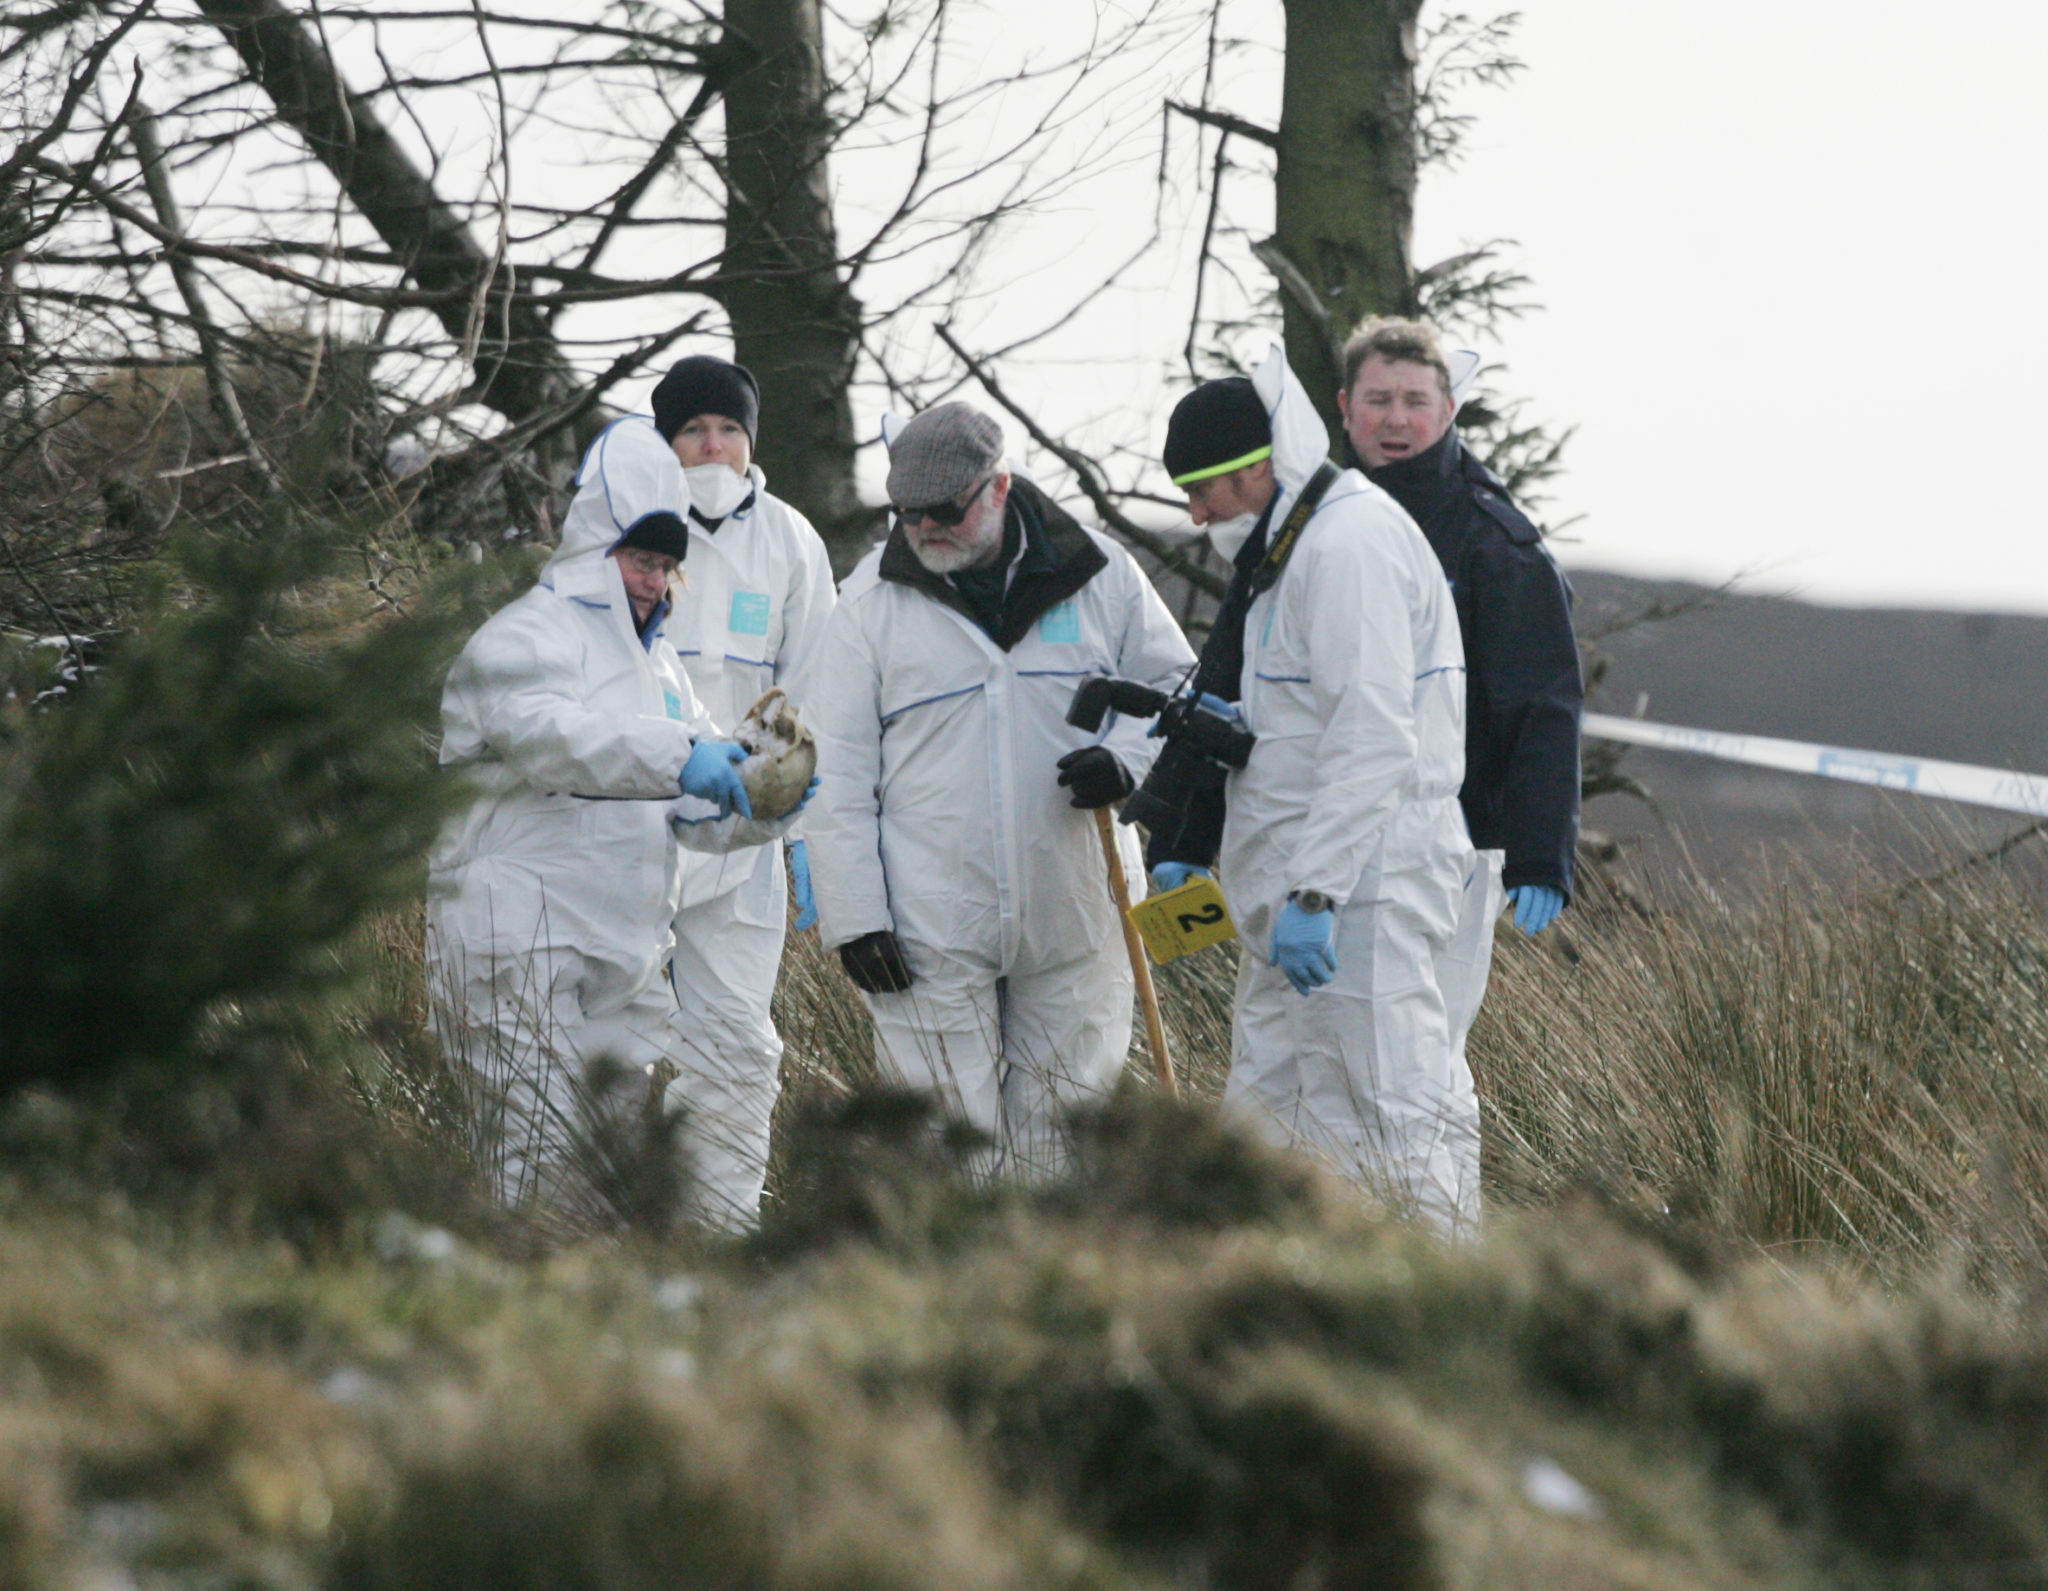 Deputy State Pathologist Dr Michael Curtis (centre with sunglasses) at the scene where remains of a man were found by a walker off the Military Road near Viewpoint, 01-02-2010